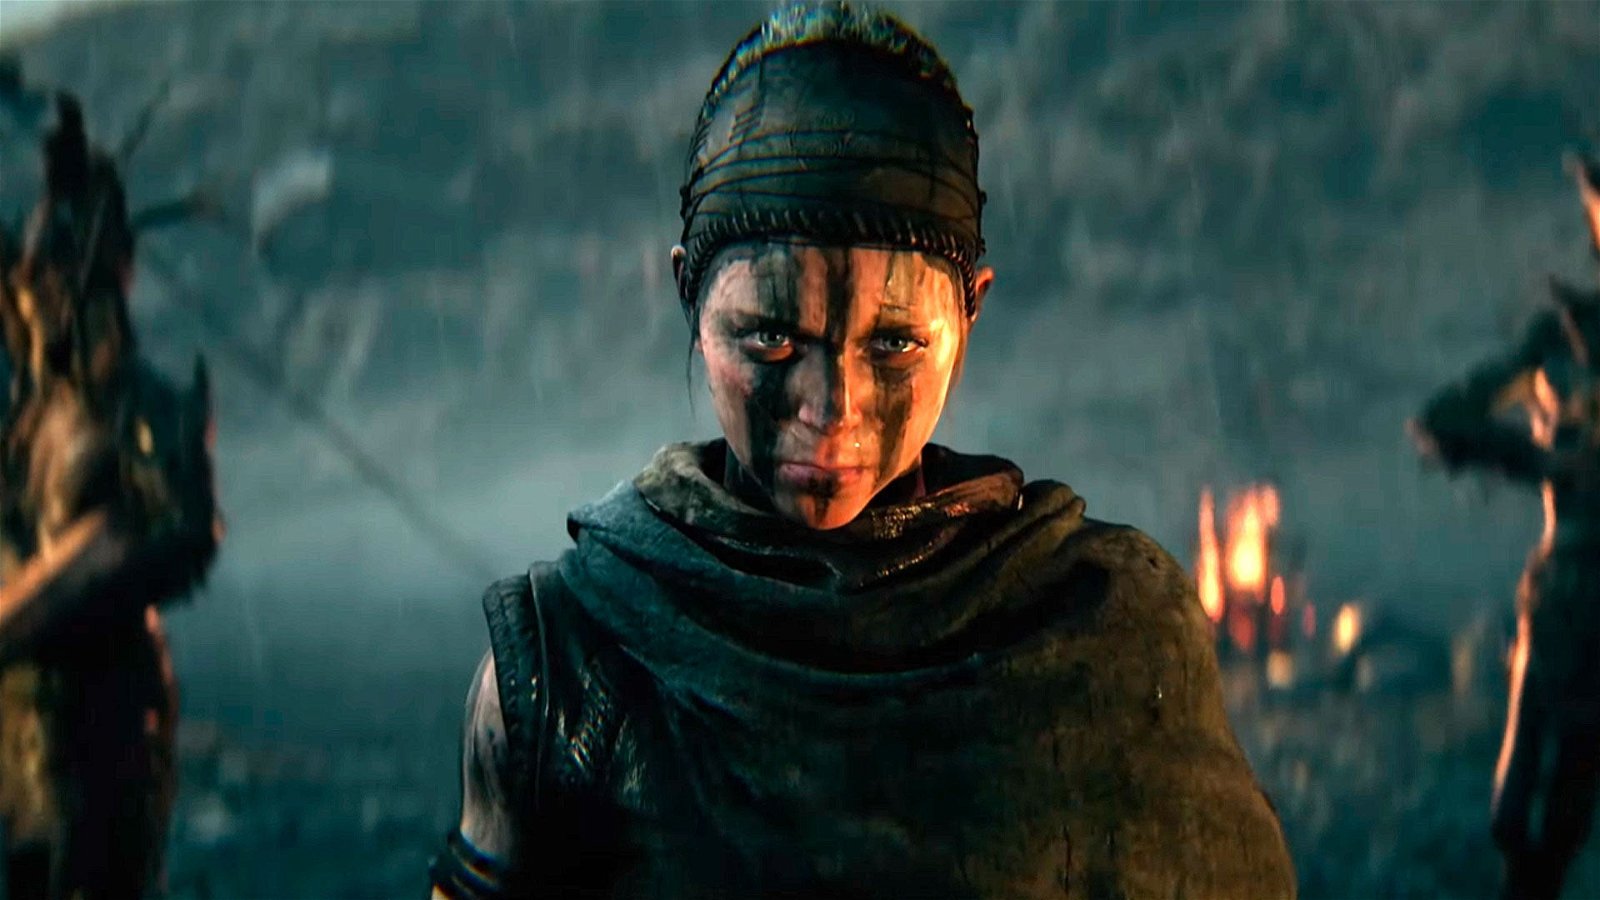 Does Hellblade 2 run on your PC? Here are the requirements